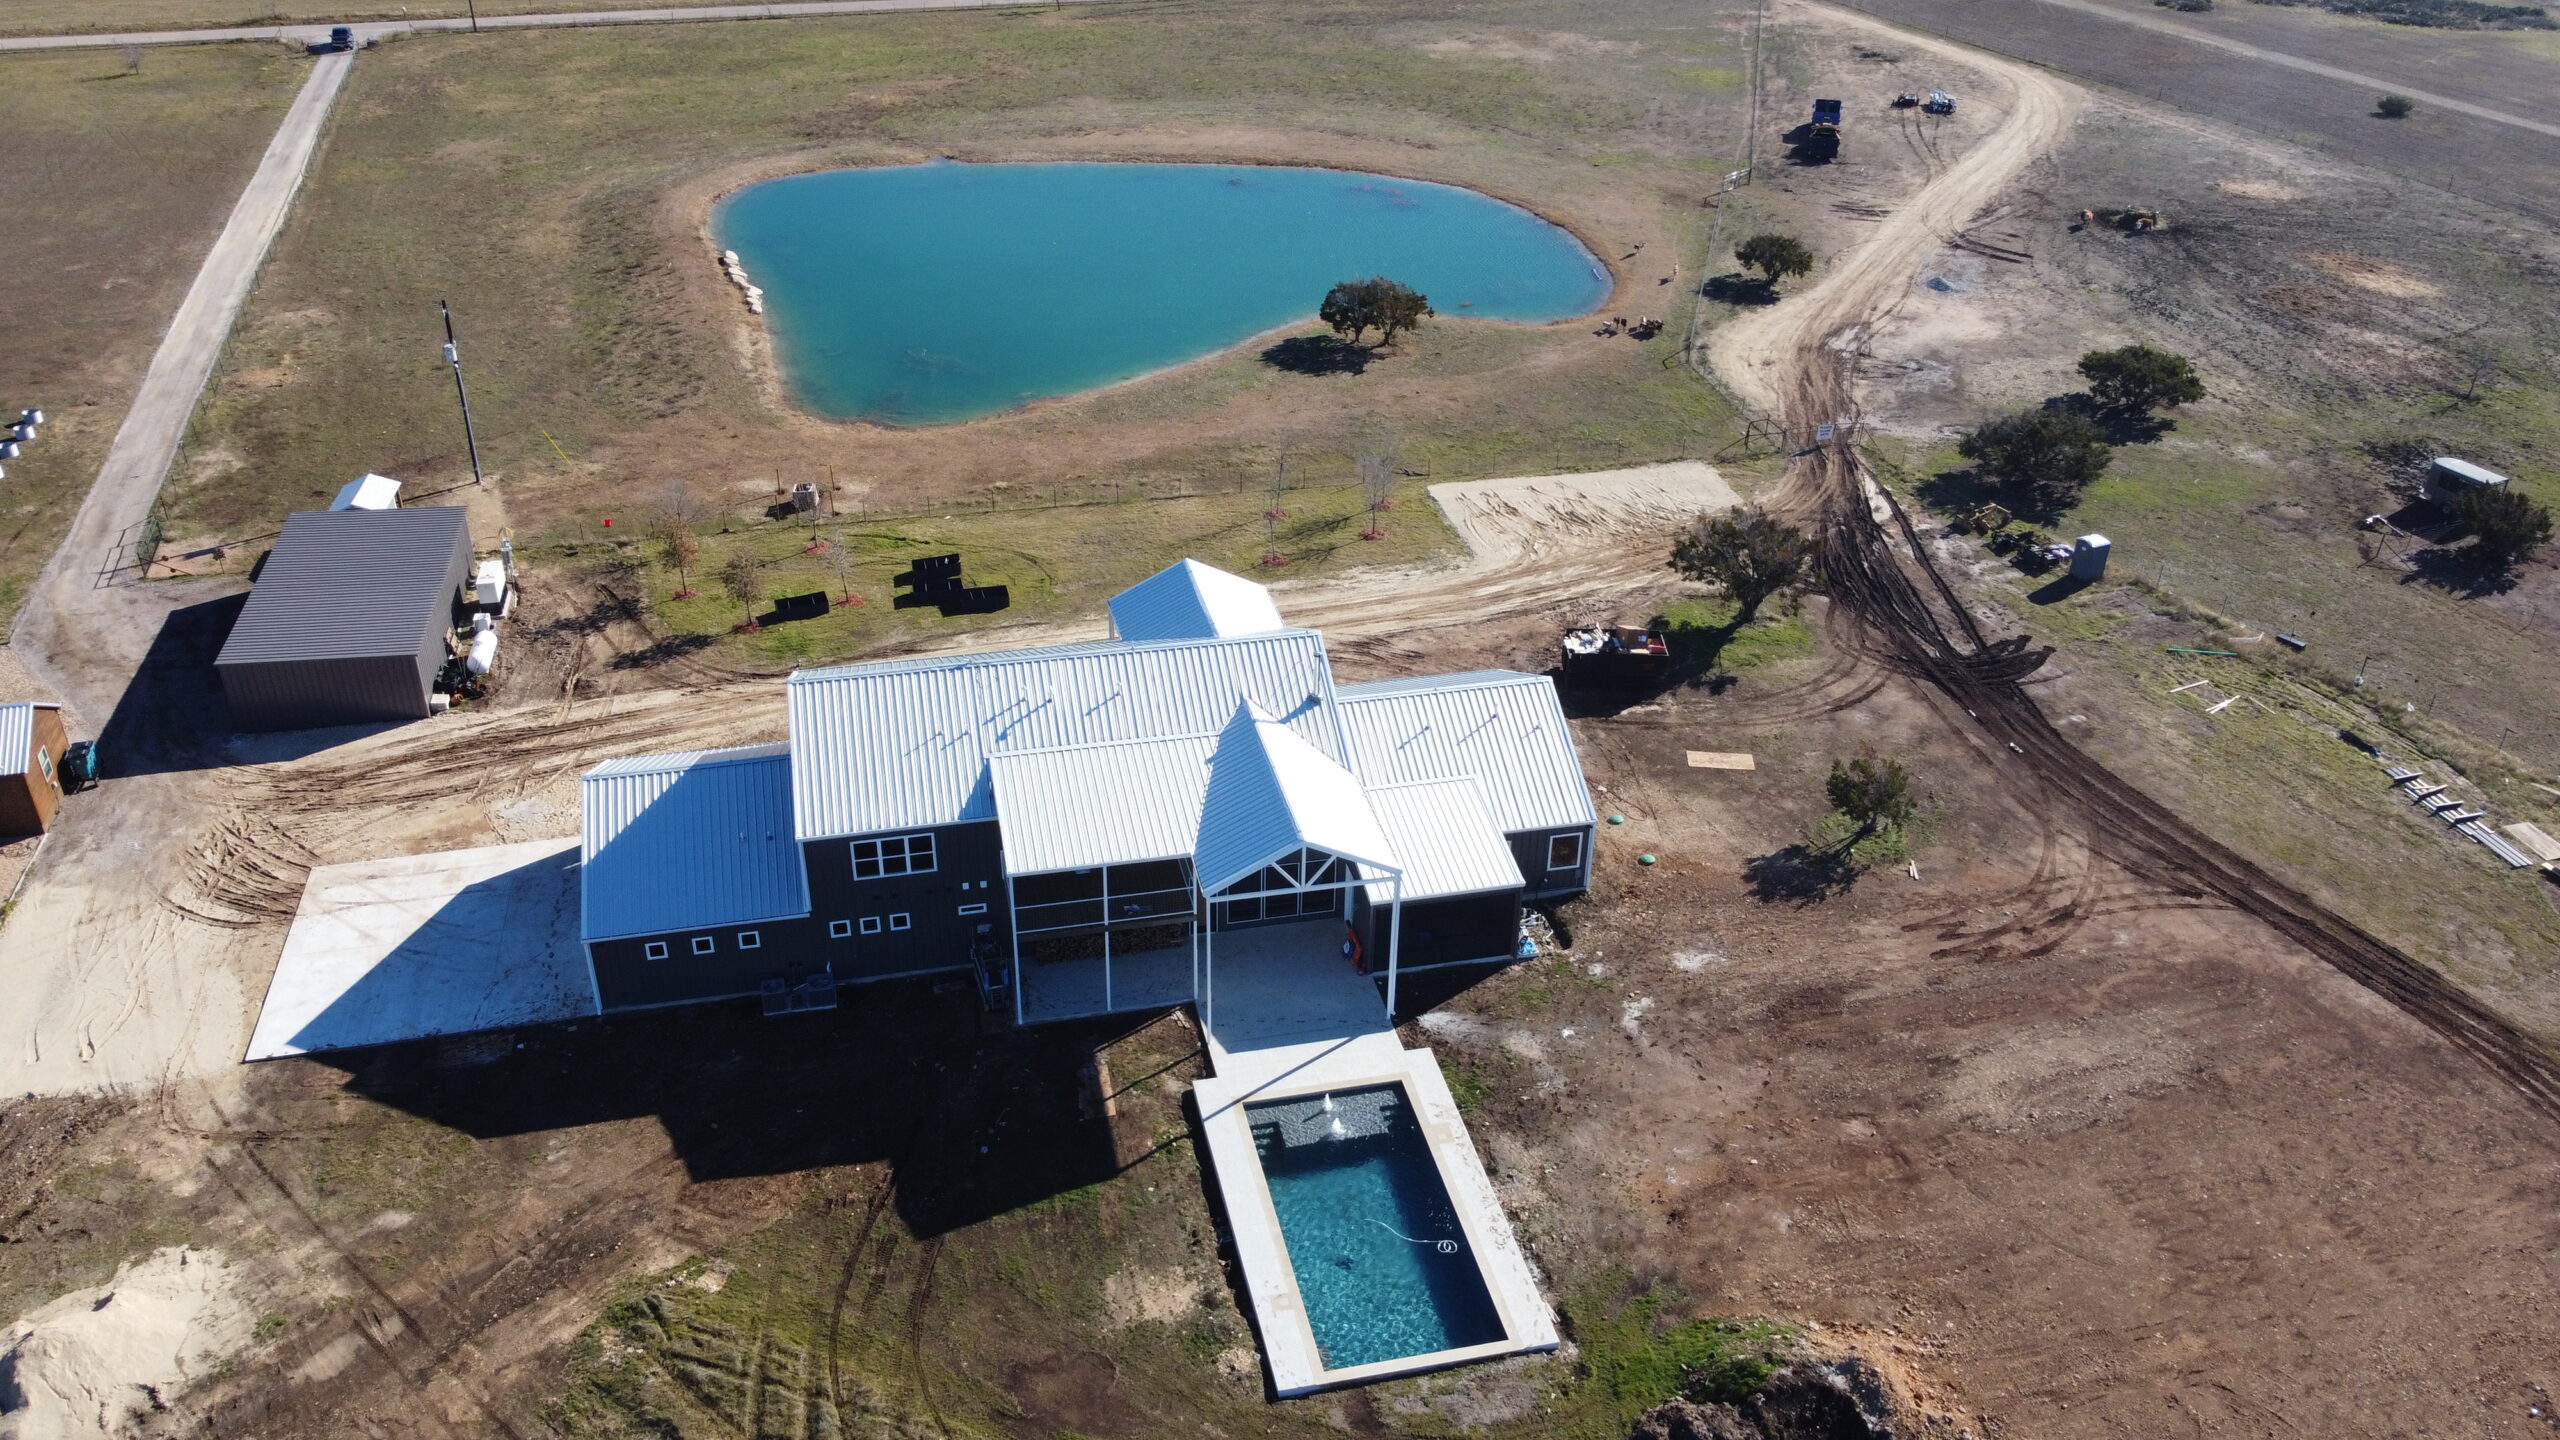 Check out some of our recent finished ponds!